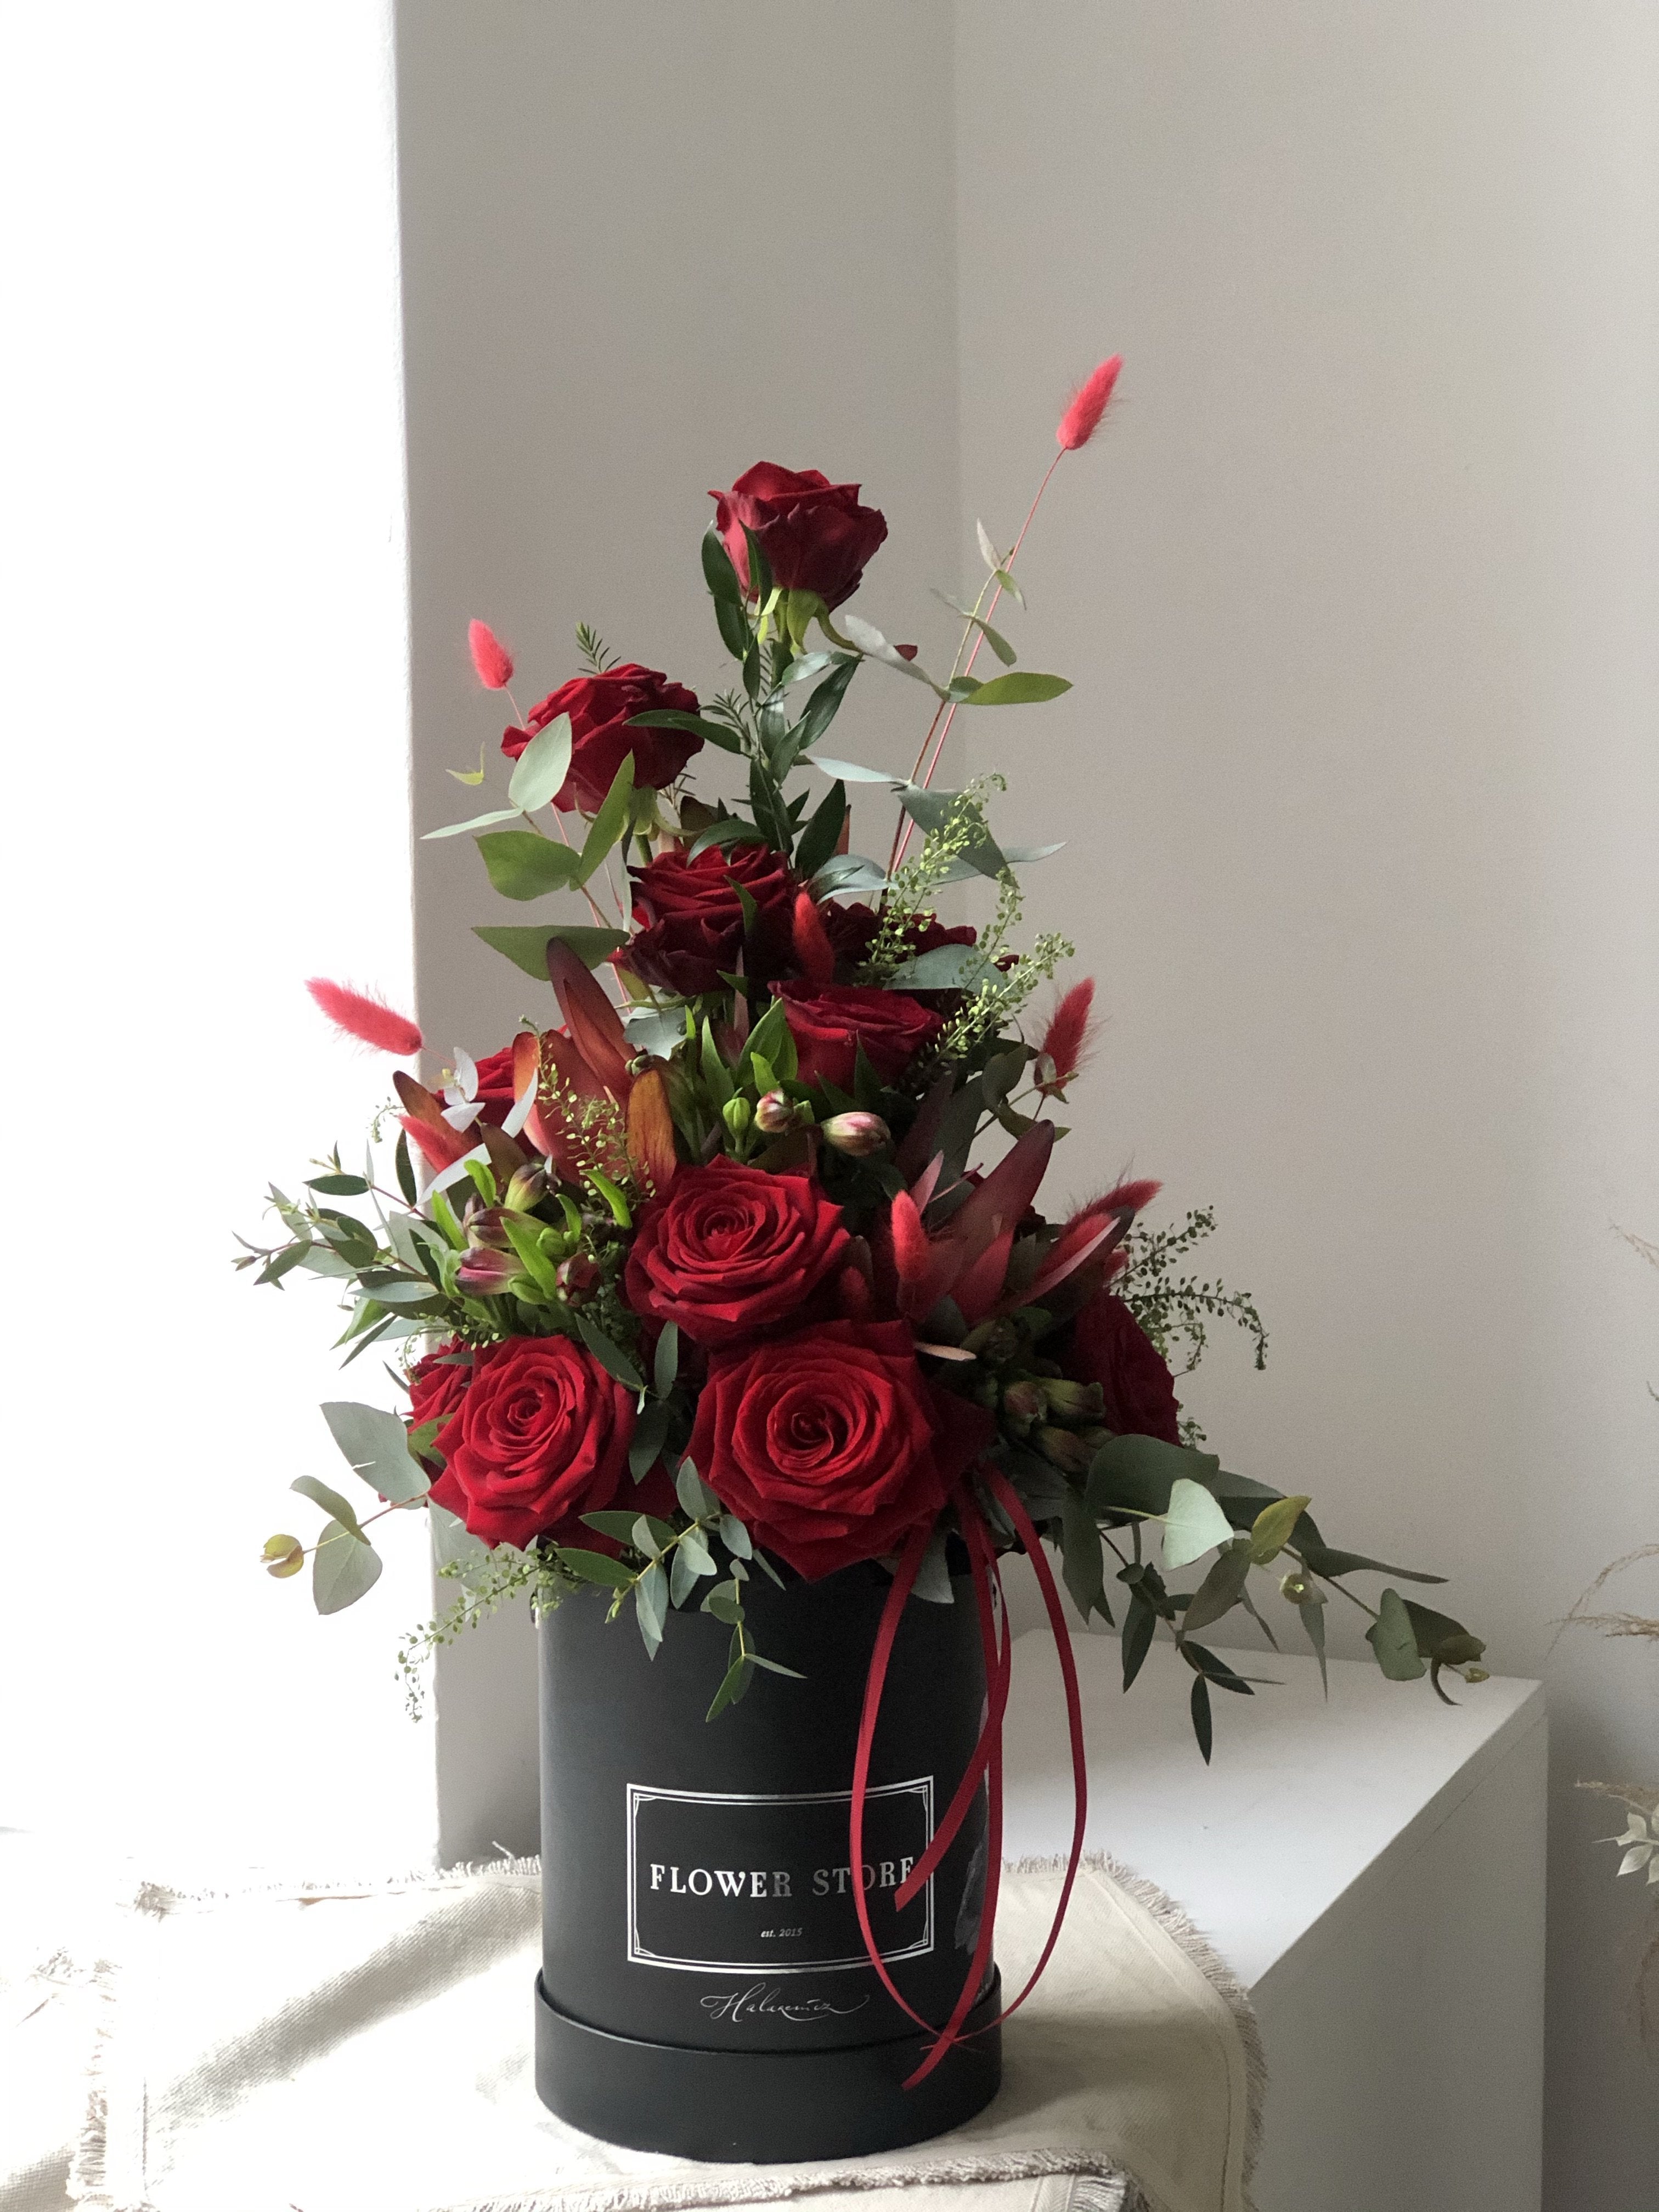 Composition with red roses - live flowers in a black box with graphics